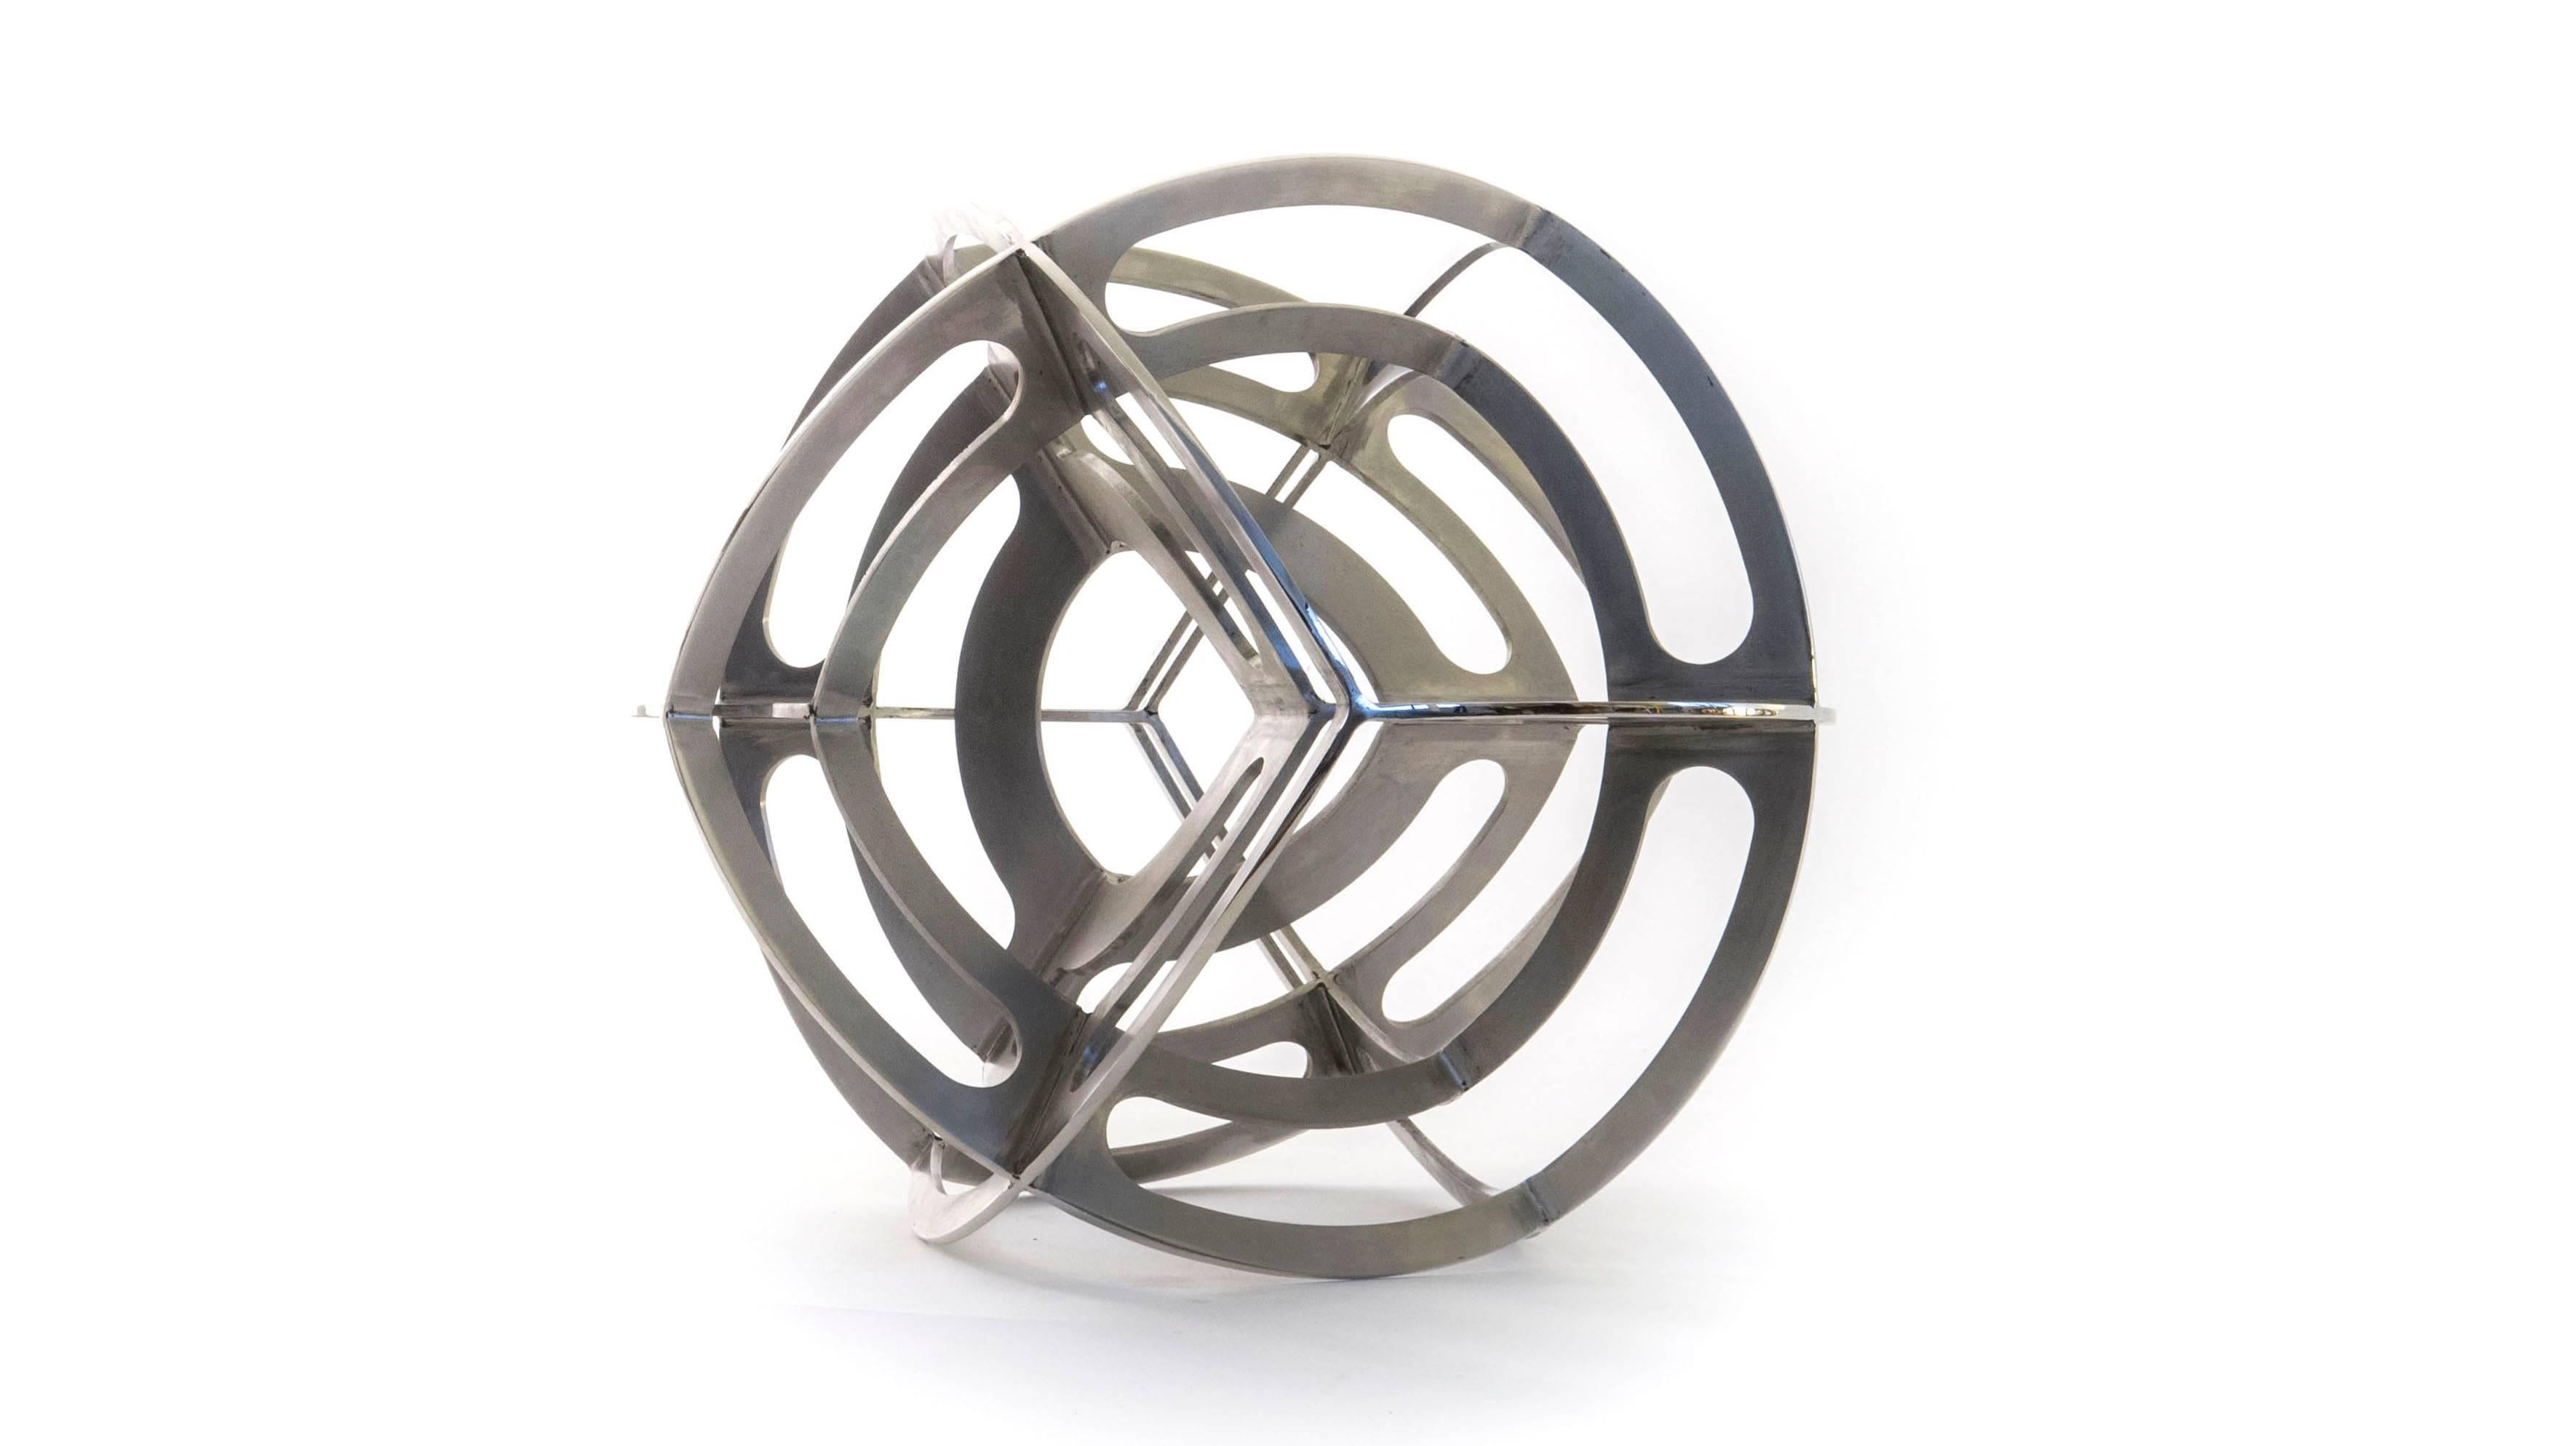 Other Contemporary Mexican Geometric Dual Tetrahedron Sphere Stainless Steel Sculpture For Sale